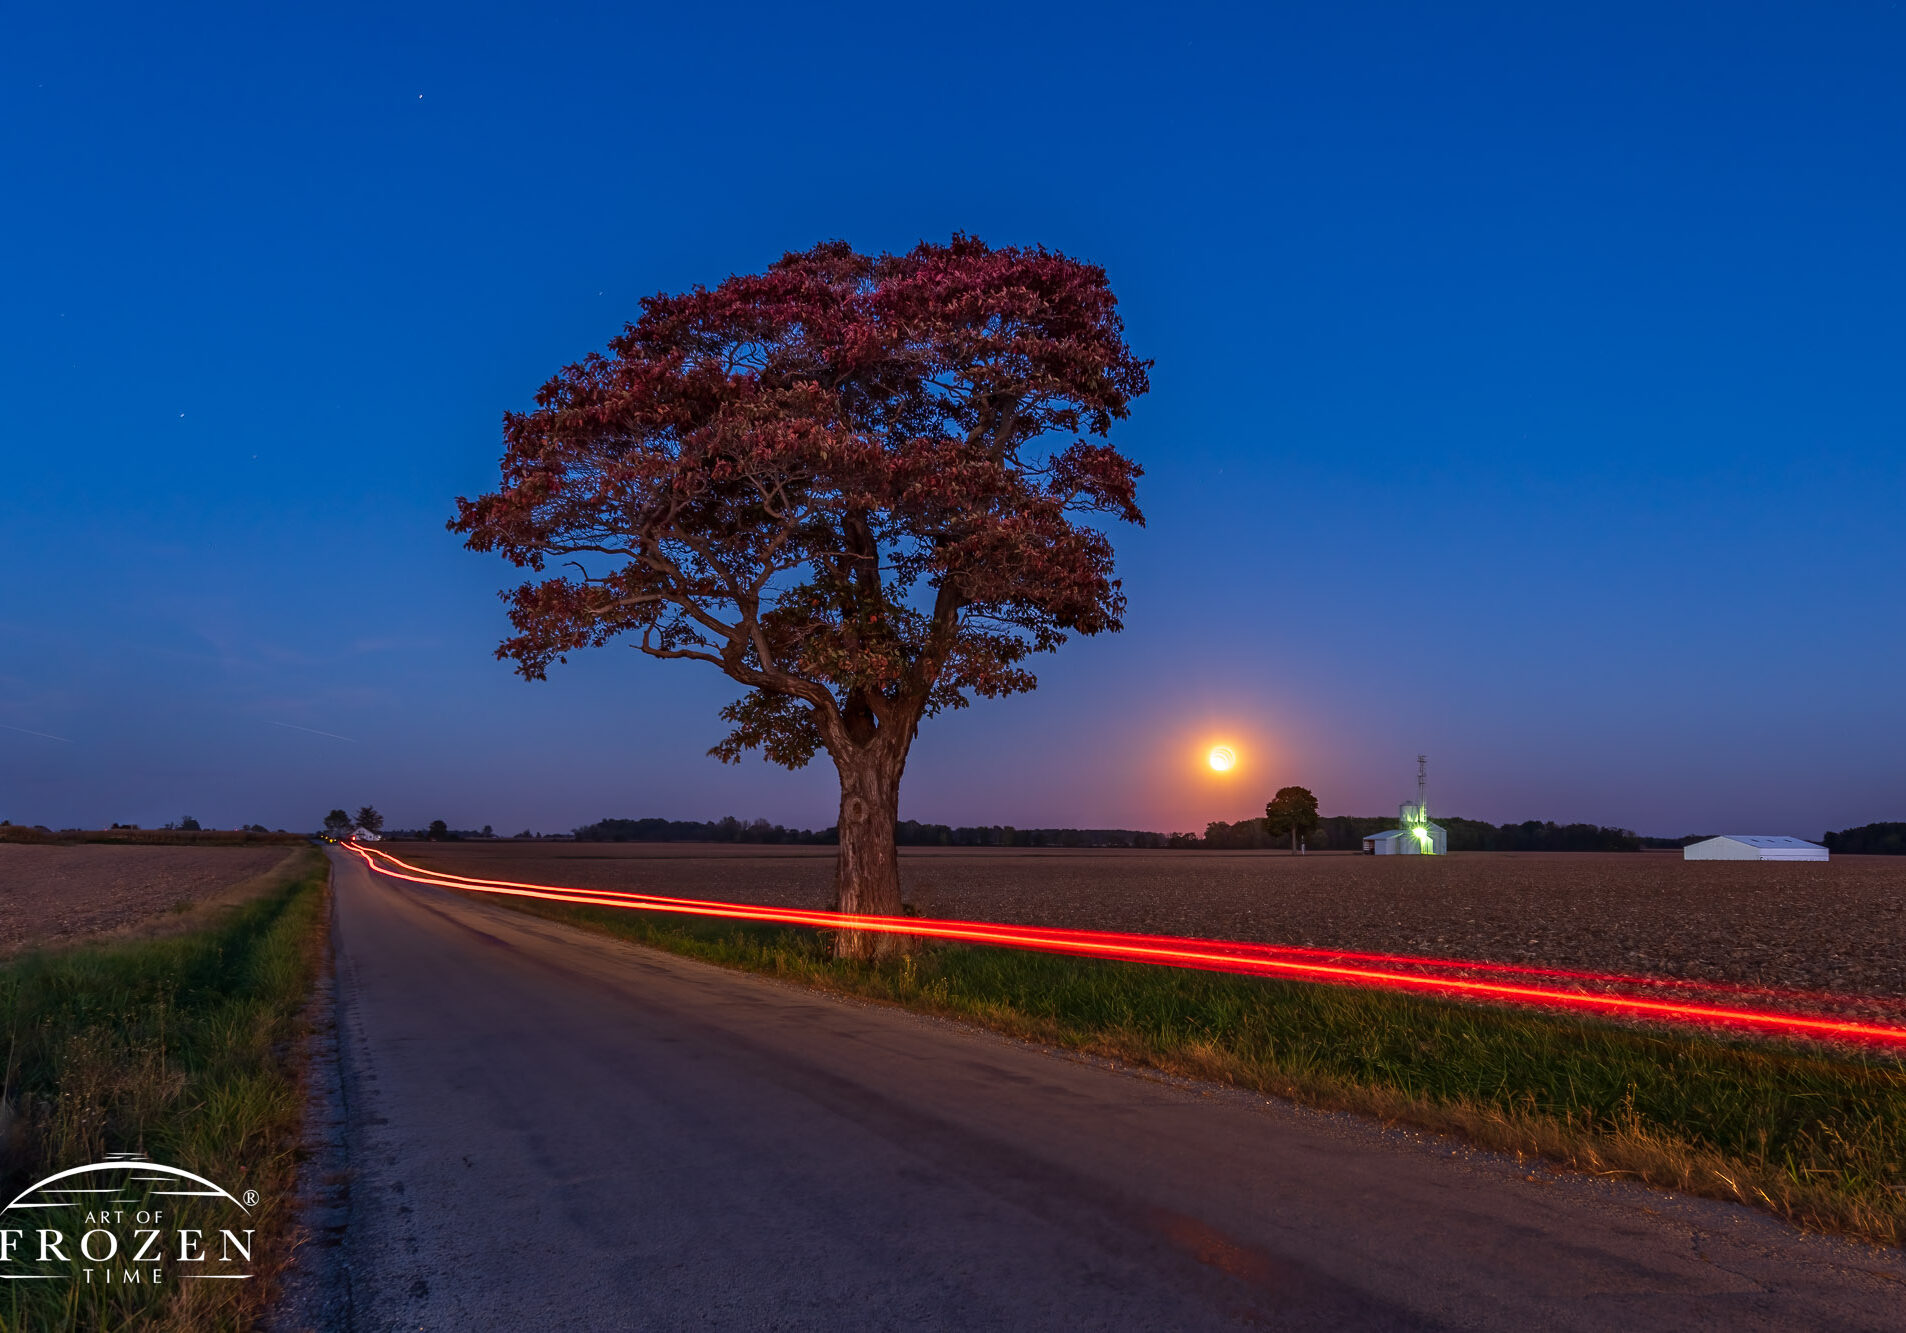 Hunters Moonrise over Greene County featuring a tree along an empty country road which cuts through fields recently cleared of corn.